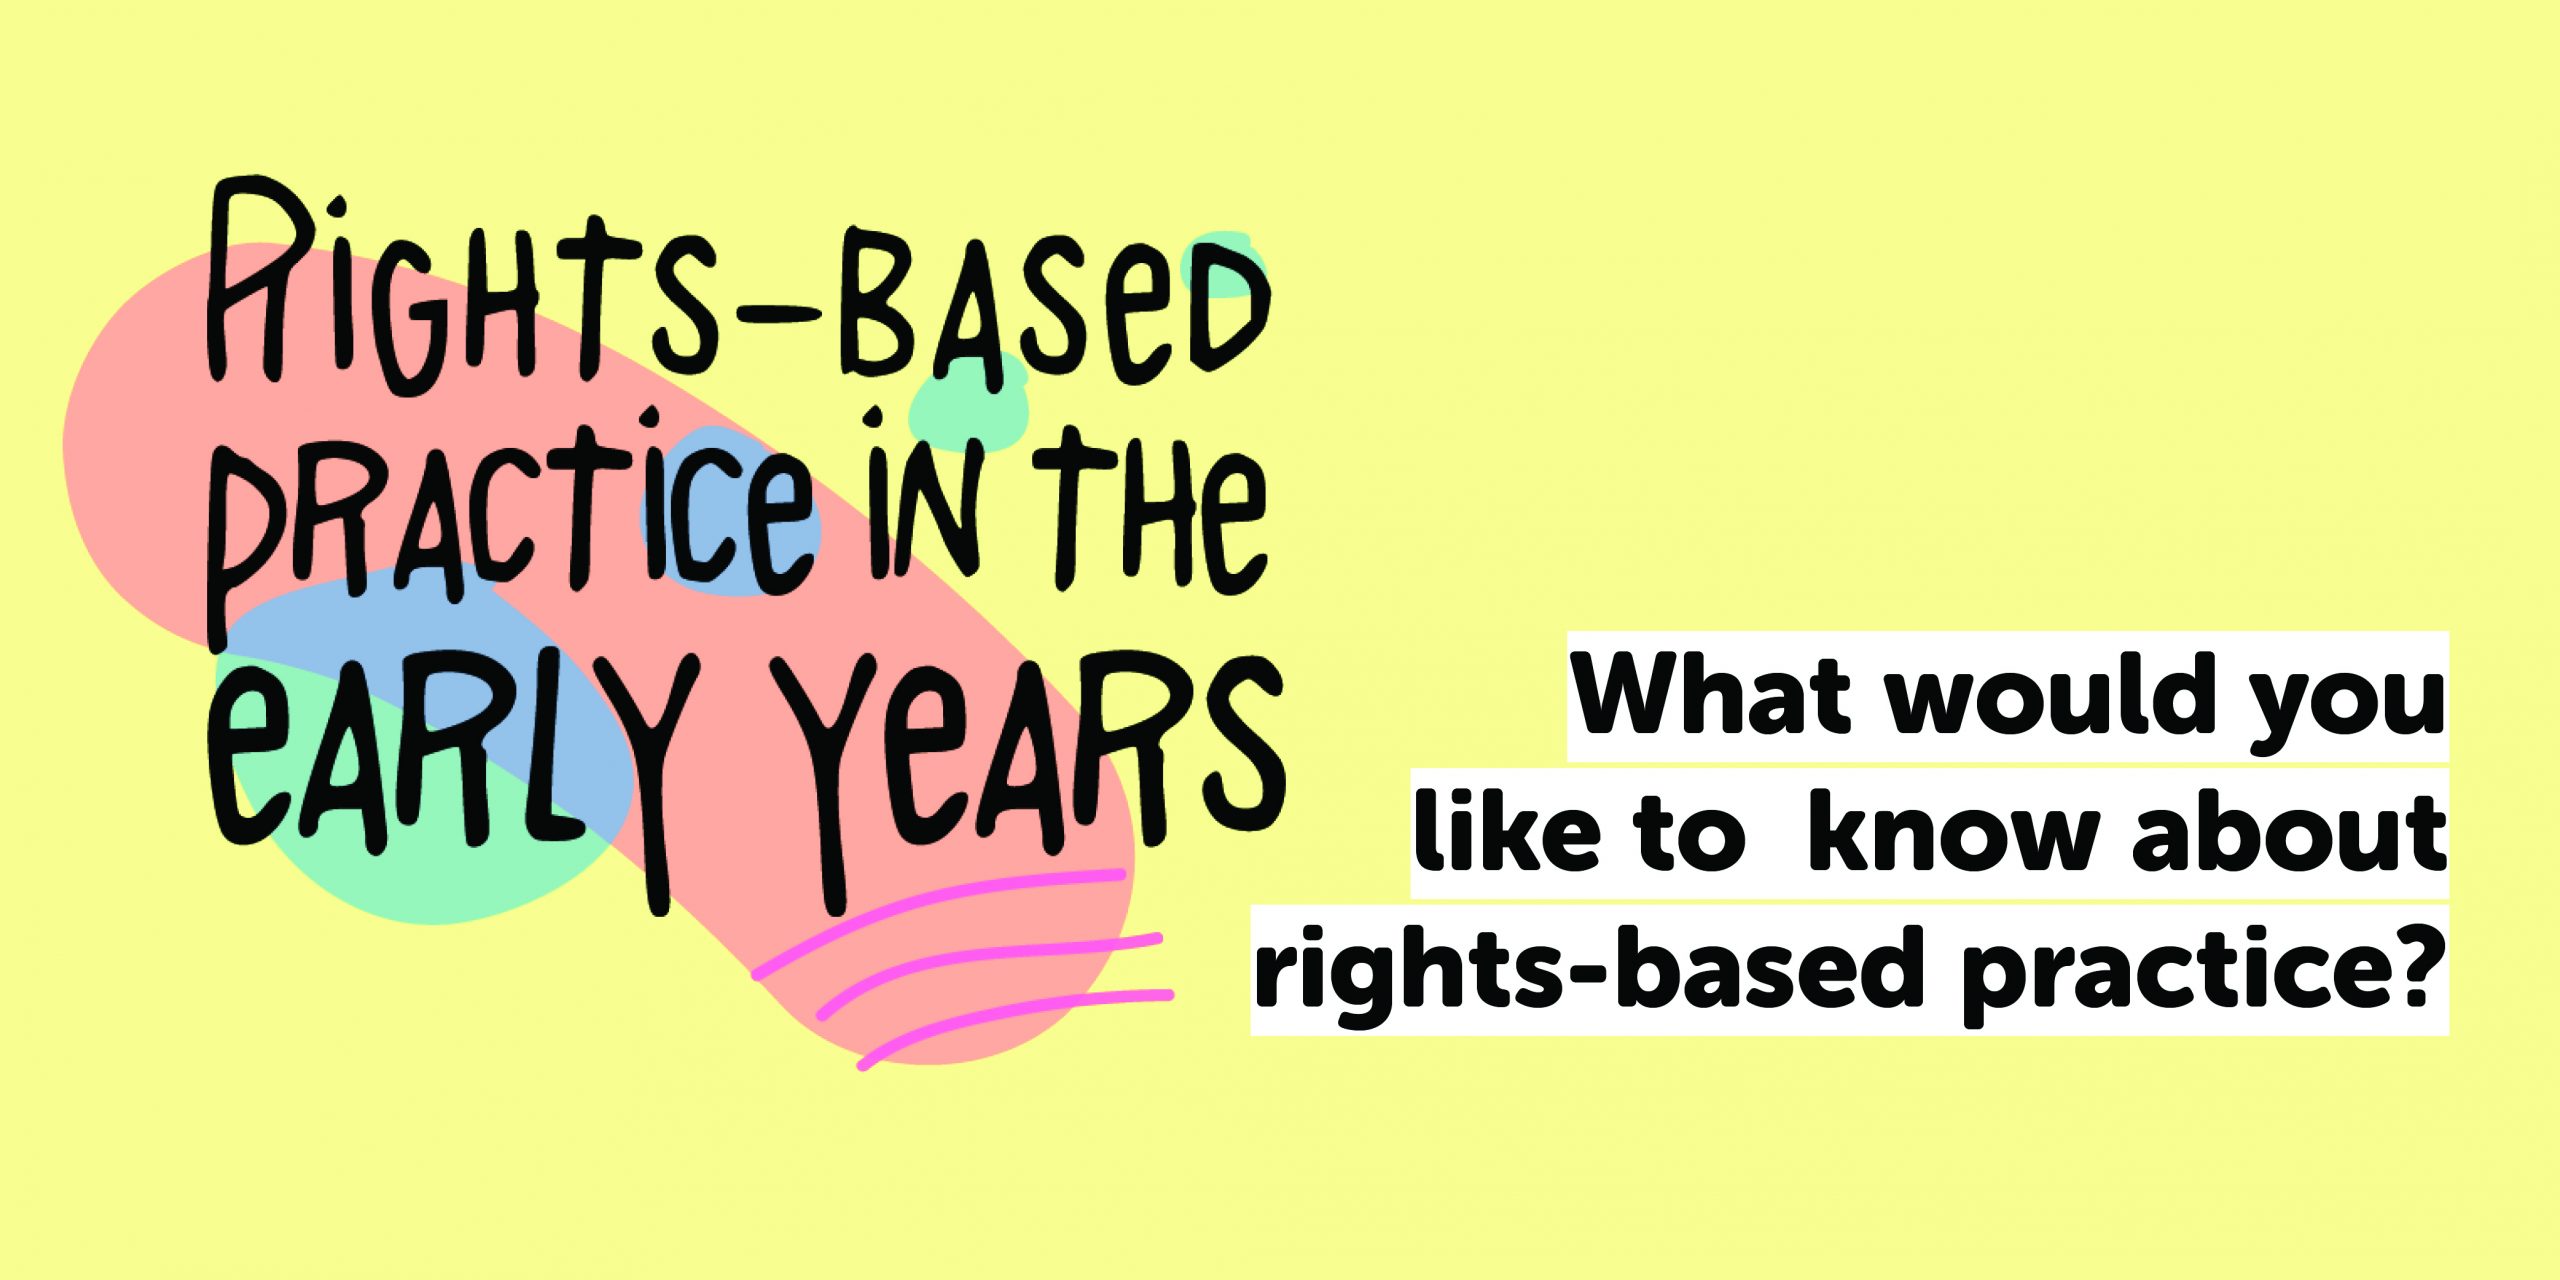 rights-based approach in the early years